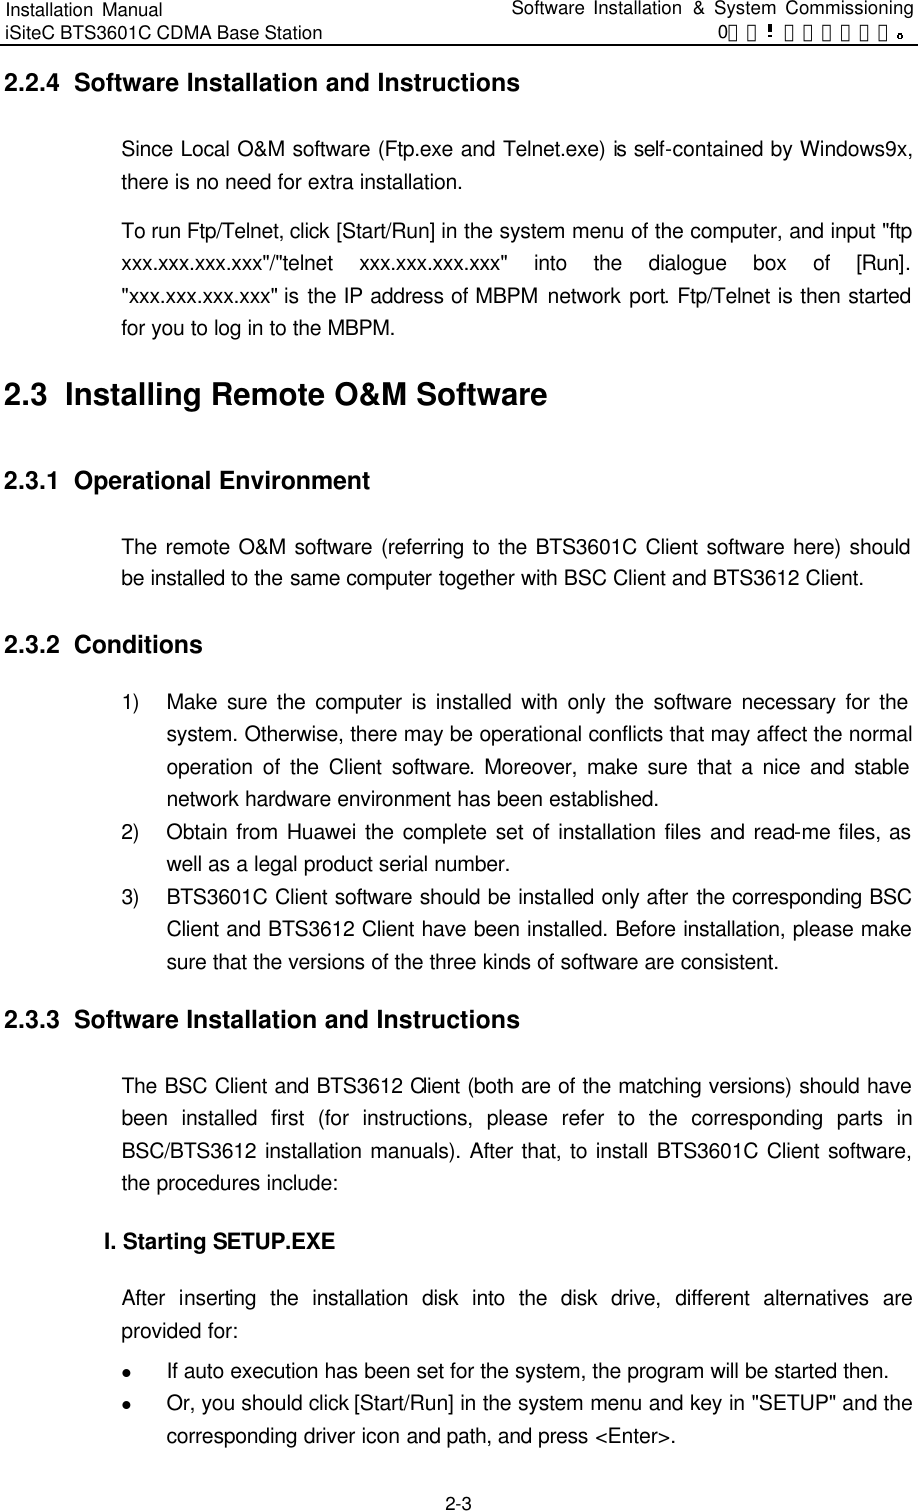 Installation Manual   iSiteC BTS3601C CDMA Base Station Software Installation &amp; System Commissioning 0错误 表格结果无效  2-3 2.2.4  Software Installation and Instructions Since Local O&amp;M software (Ftp.exe and Telnet.exe) is self-contained by Windows9x, there is no need for extra installation.   To run Ftp/Telnet, click [Start/Run] in the system menu of the computer, and input &quot;ftp xxx.xxx.xxx.xxx&quot;/&quot;telnet xxx.xxx.xxx.xxx&quot; into the dialogue box of [Run]. &quot;xxx.xxx.xxx.xxx&quot; is the IP address of MBPM network port. Ftp/Telnet is then started for you to log in to the MBPM.   2.3  Installing Remote O&amp;M Software 2.3.1  Operational Environment The remote O&amp;M software (referring to the BTS3601C Client software here) should be installed to the same computer together with BSC Client and BTS3612 Client.   2.3.2  Conditions 1) Make sure the computer is installed with only the software necessary for the system. Otherwise, there may be operational conflicts that may affect the normal operation of the Client software. Moreover, make sure that a nice and stable network hardware environment has been established. 2) Obtain from Huawei the complete set of installation files and read-me files, as well as a legal product serial number.   3) BTS3601C Client software should be installed only after the corresponding BSC Client and BTS3612 Client have been installed. Before installation, please make sure that the versions of the three kinds of software are consistent.   2.3.3  Software Installation and Instructions The BSC Client and BTS3612 Client (both are of the matching versions) should have been installed first (for instructions, please refer to the corresponding parts in BSC/BTS3612 installation manuals). After that, to install BTS3601C Client software, the procedures include:   I. Starting SETUP.EXE　After inserting the installation disk into the disk drive,  different alternatives are provided for: l If auto execution has been set for the system, the program will be started then.   l Or, you should click [Start/Run] in the system menu and key in &quot;SETUP&quot; and the corresponding driver icon and path, and press &lt;Enter&gt;.   